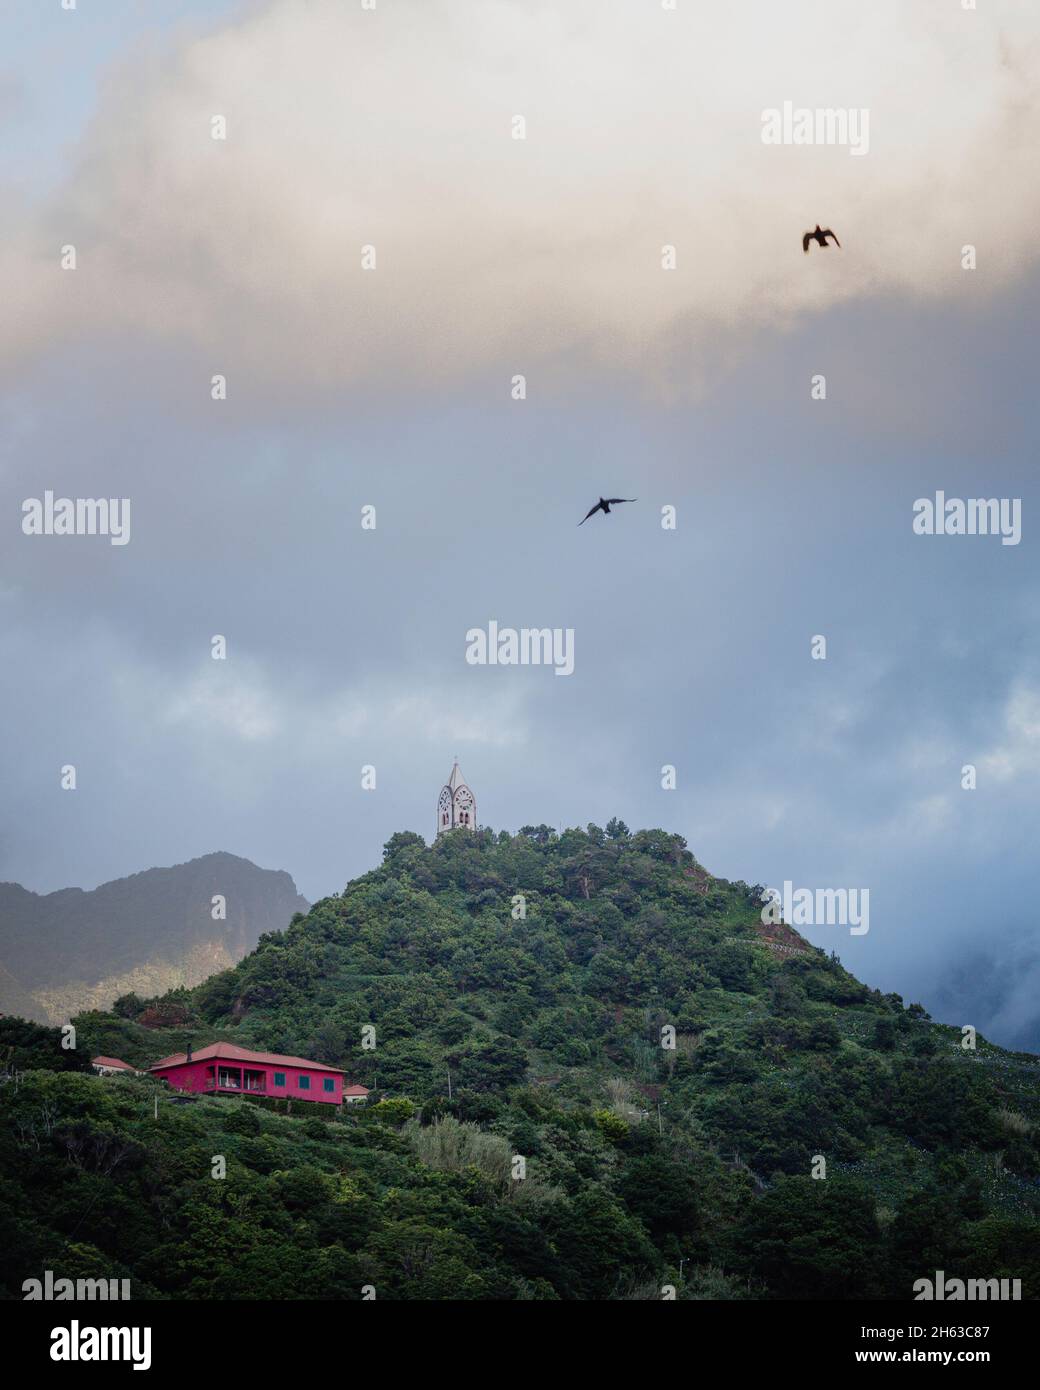 evening sky in madeira. chapel on a wooded hill and 2 birds in the sky. Stock Photo